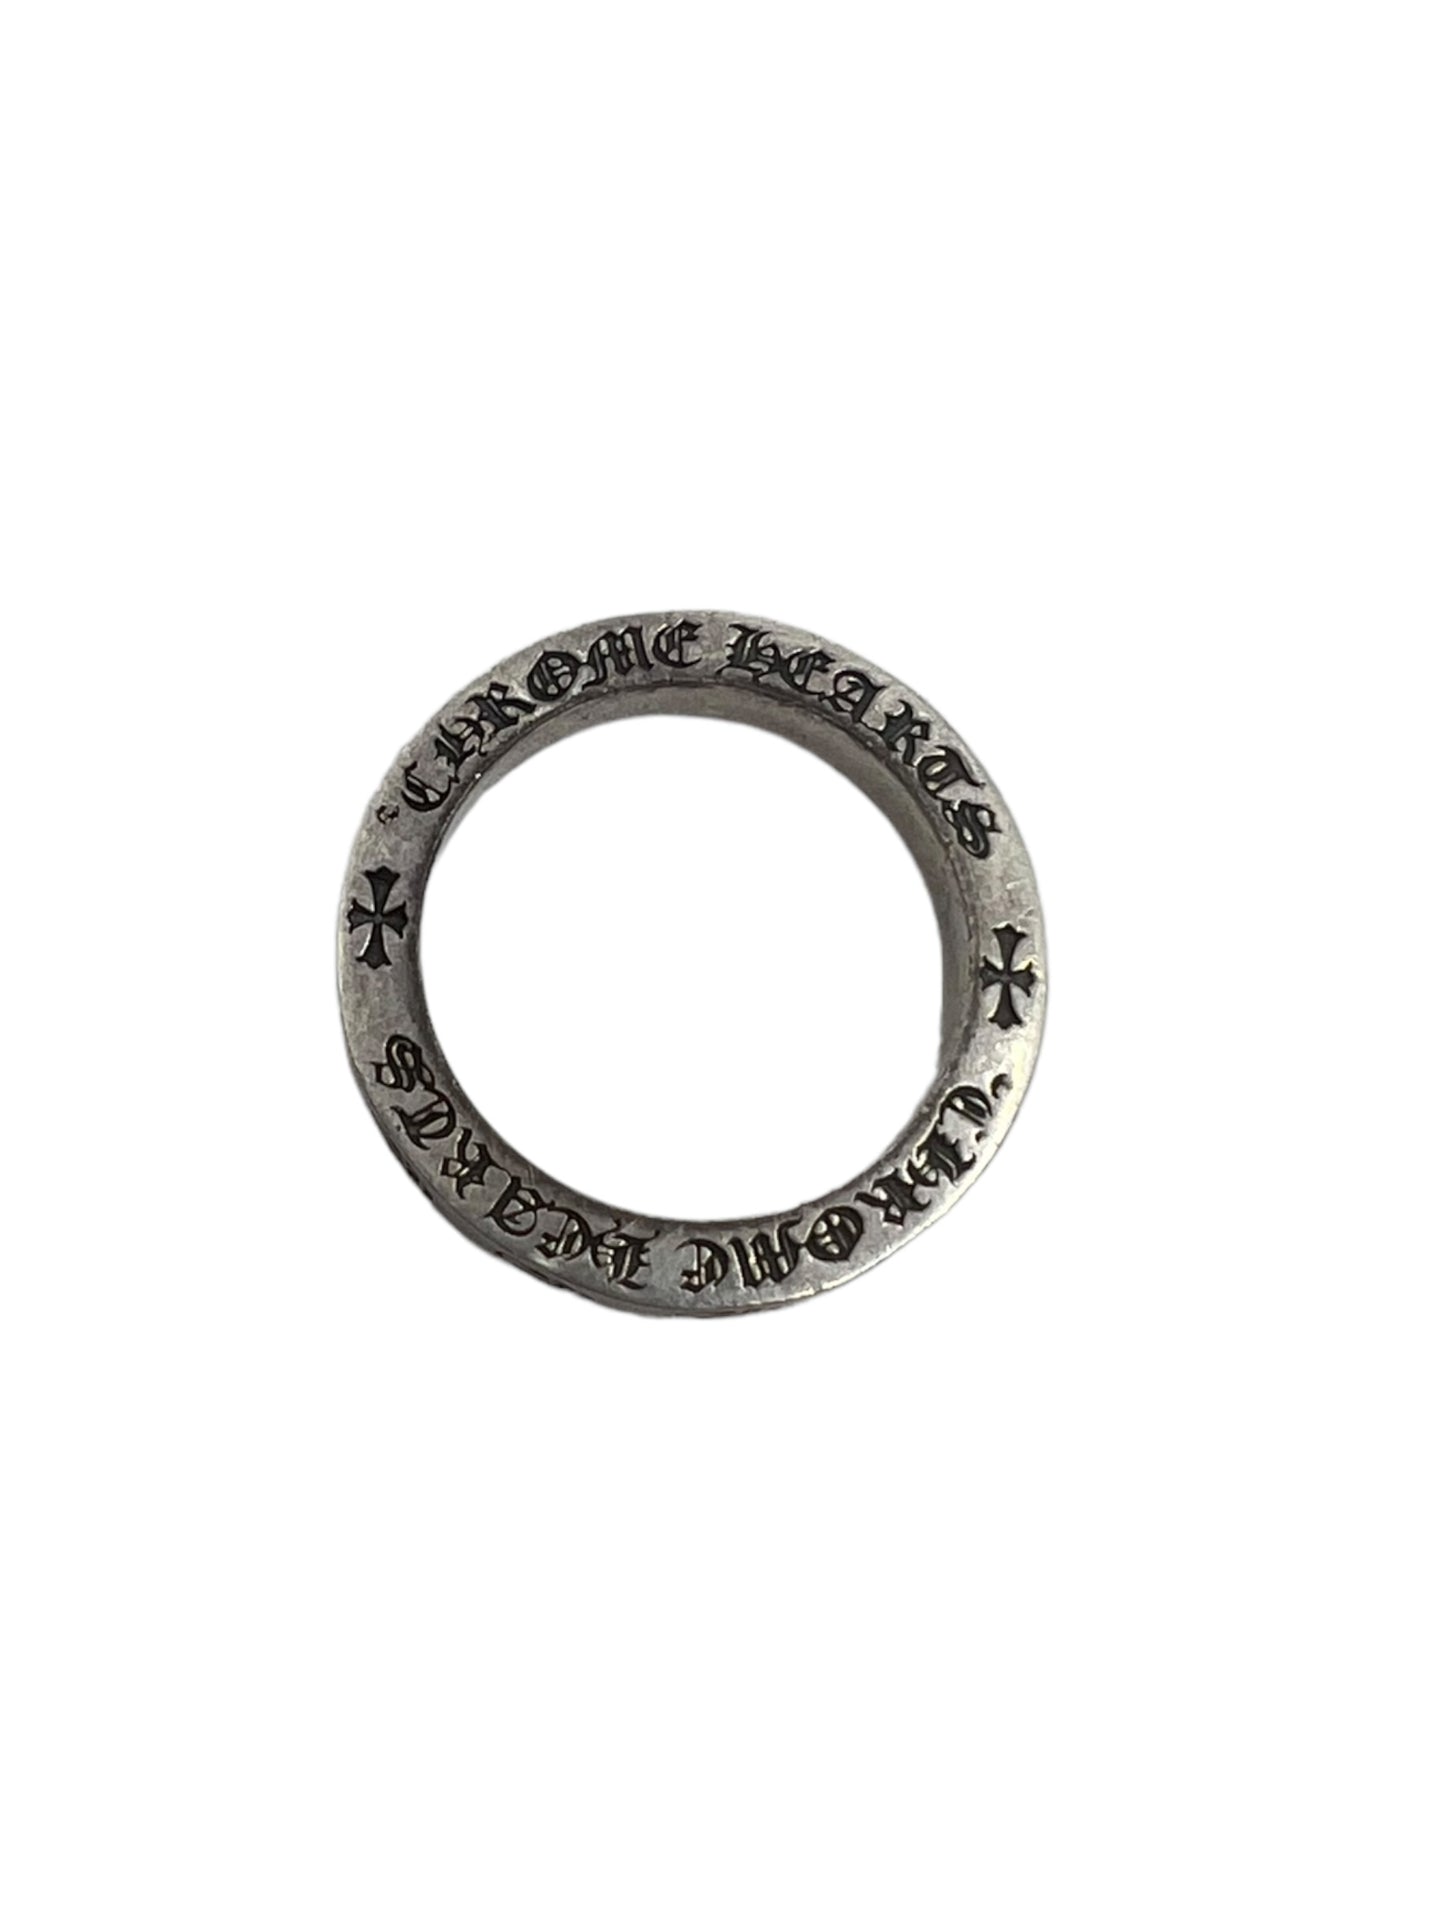 Chrome Hearts X Rolling Stone Ring size 7 pre-owned